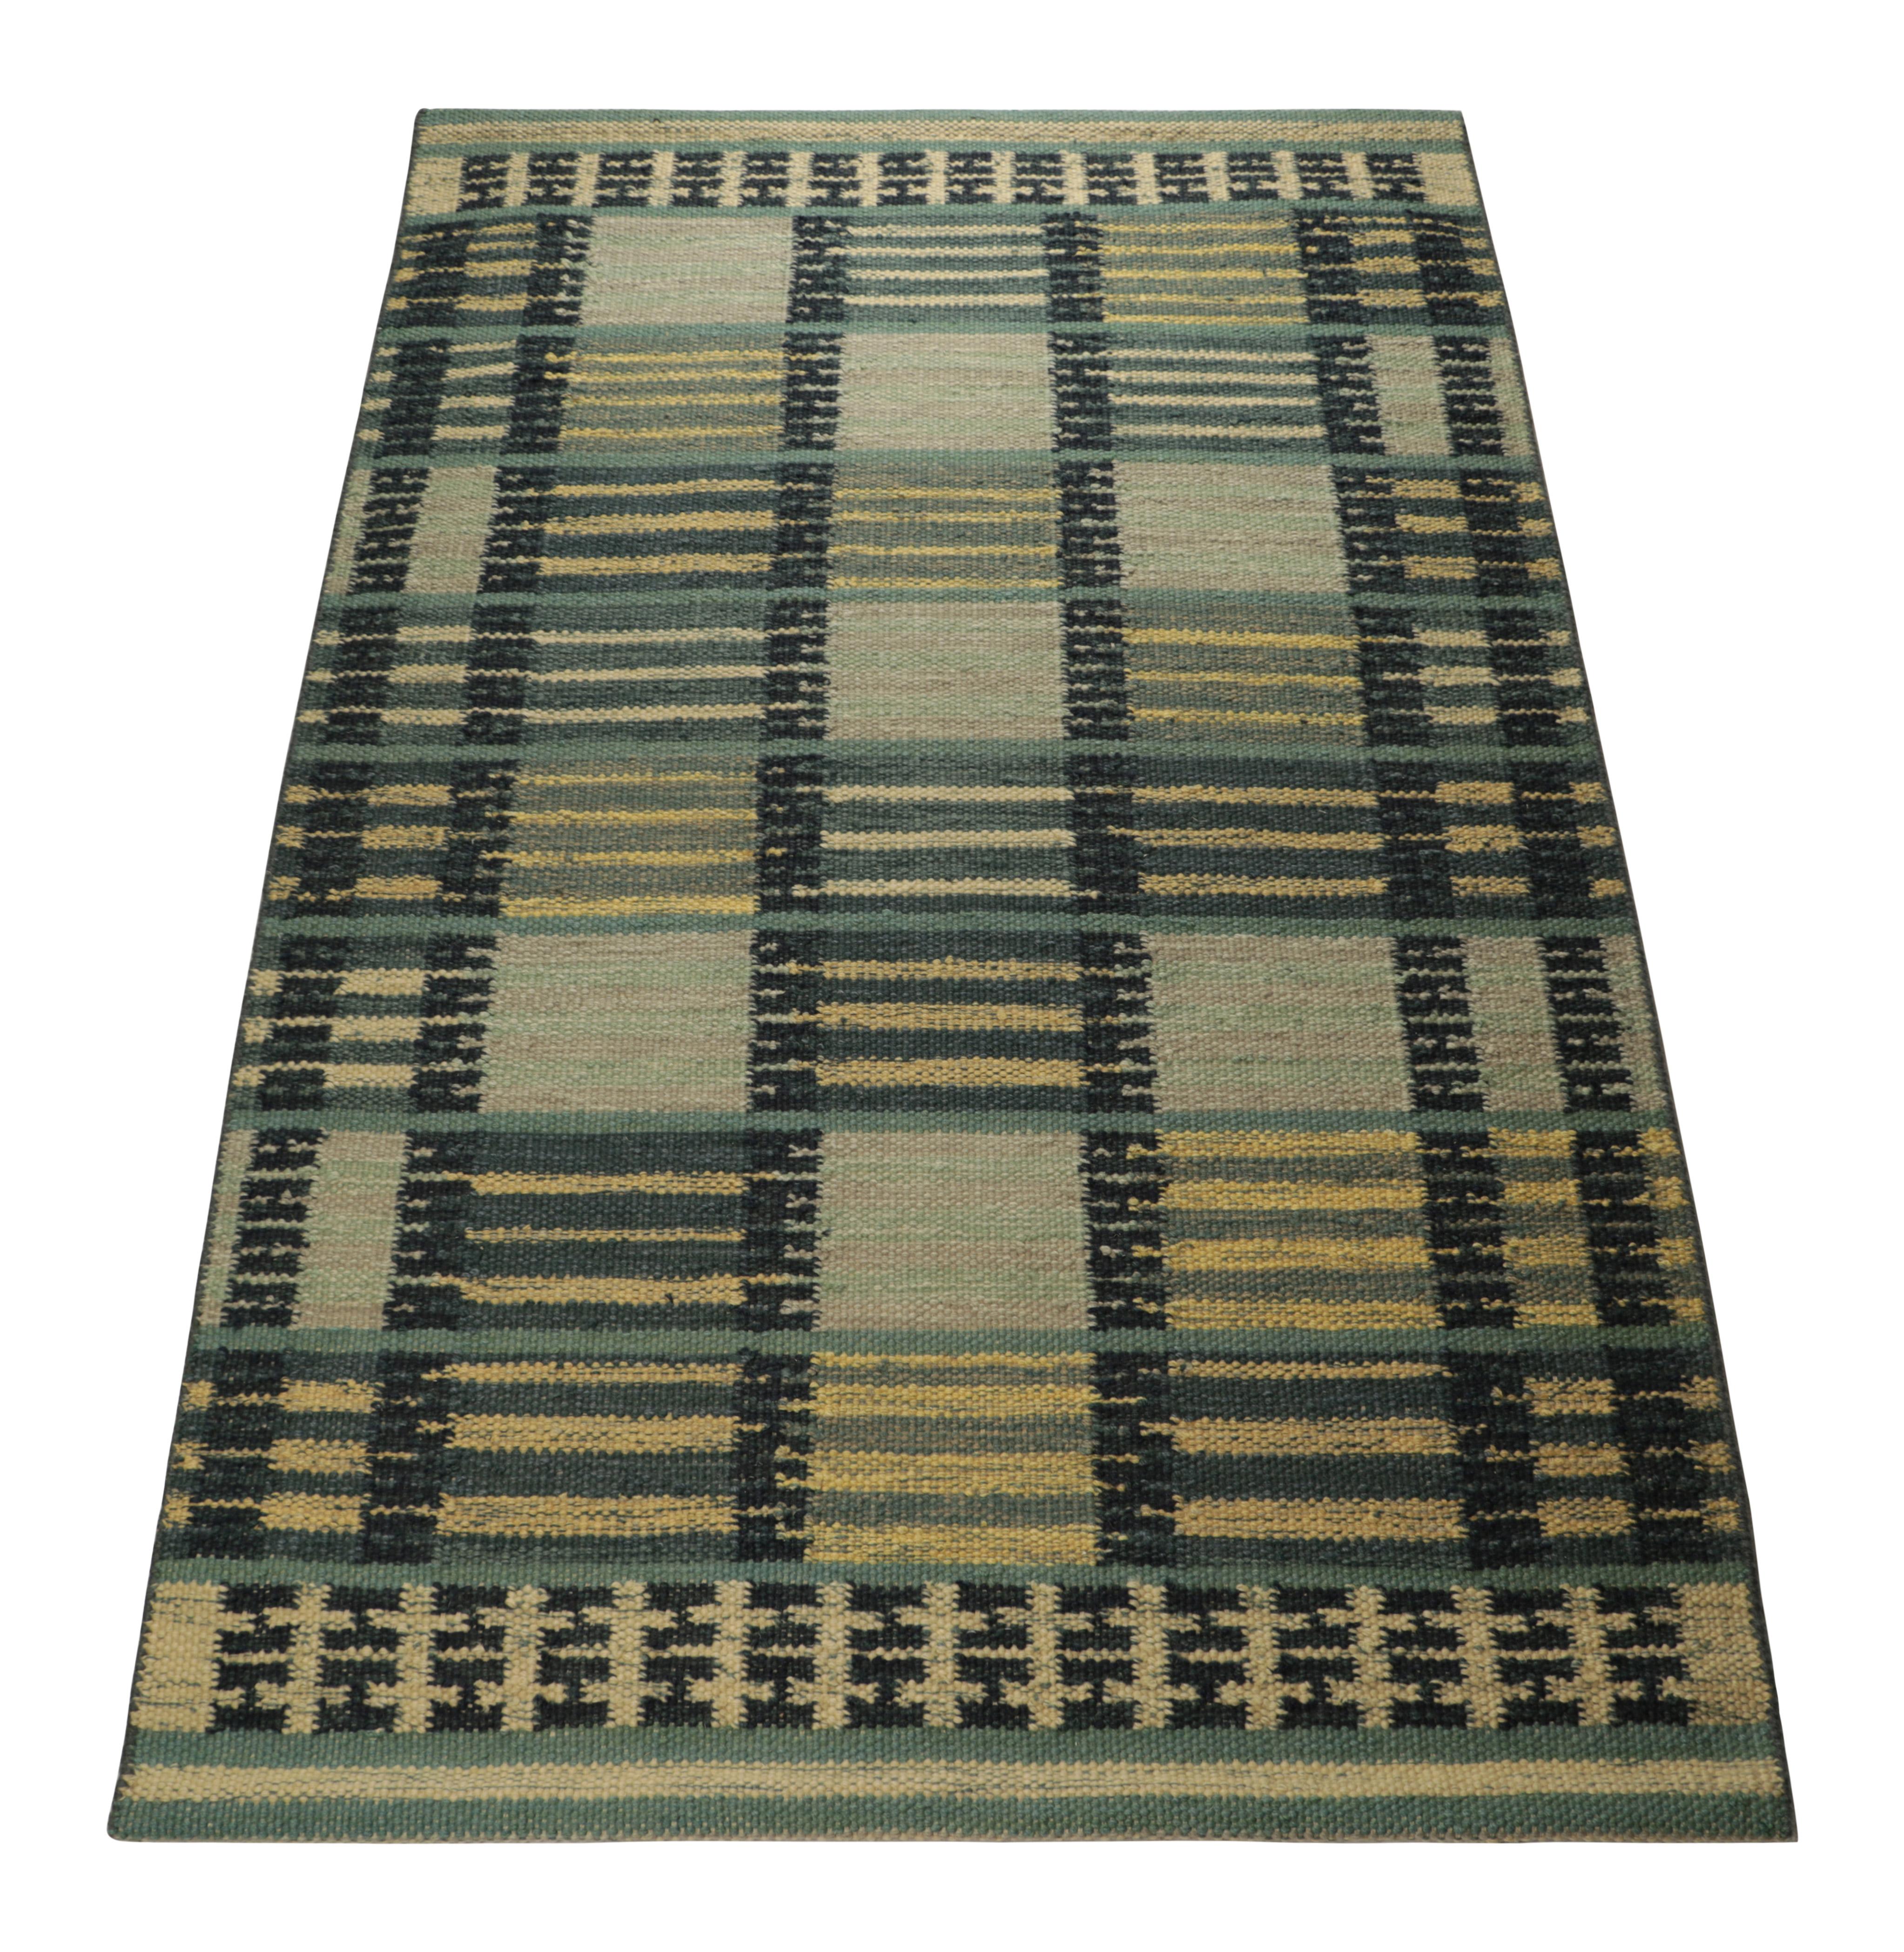 Indian Rug & Kilim’s Scandinavian Style Rug in Blue Tones, with Stripes and Patterns For Sale